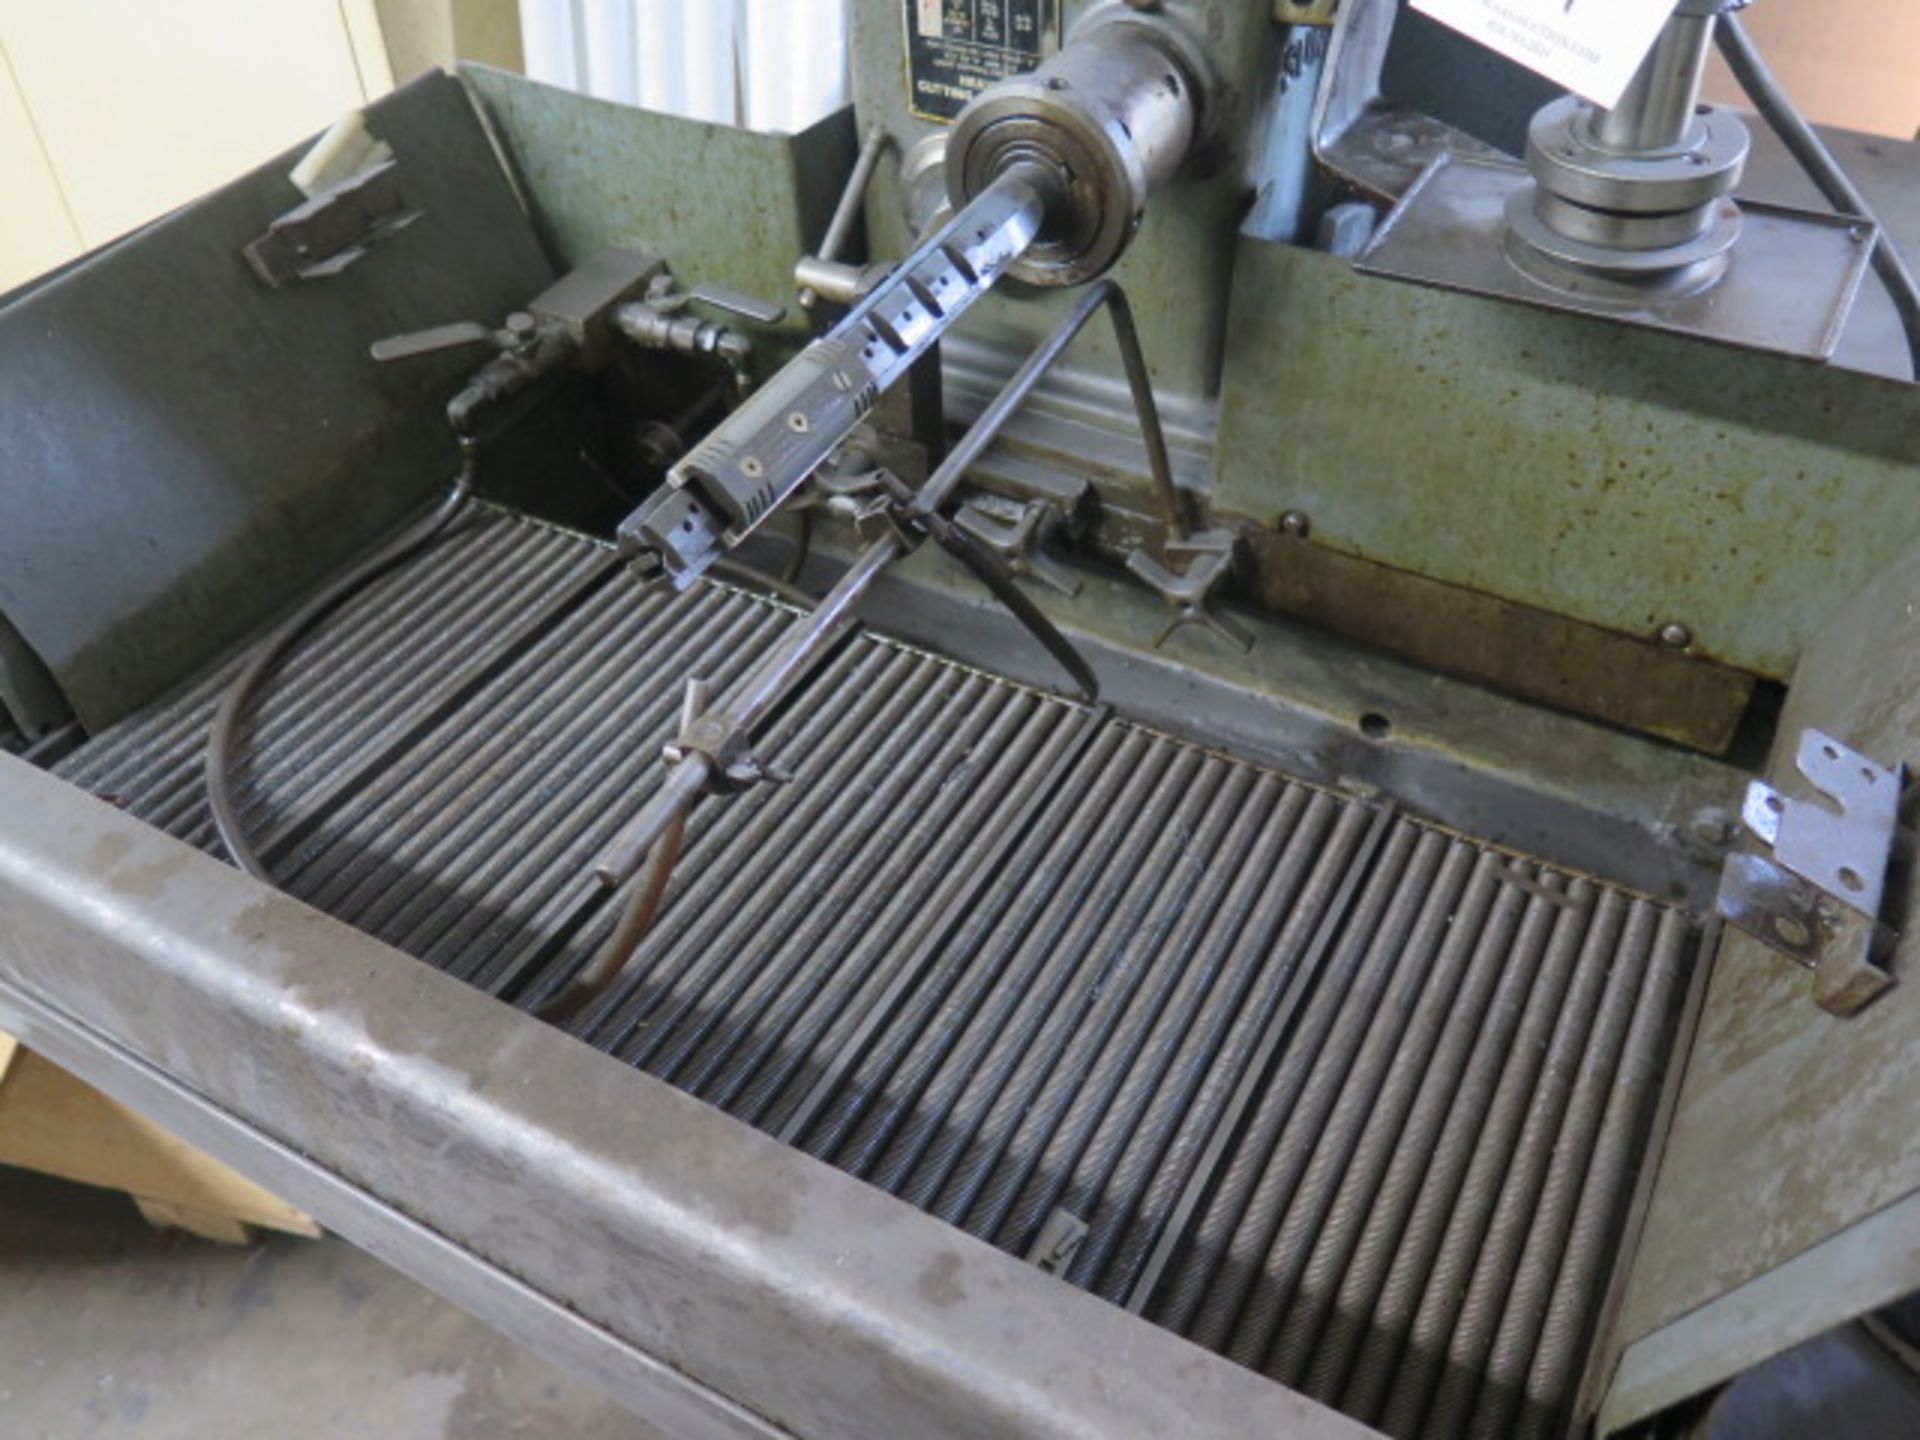 Sunnen MGG-1650 Precision Honing Machine s/n 50631 w/ 12-Speeds, Coolant (SOLD AS-IS - NO WARRANTY) - Image 4 of 6